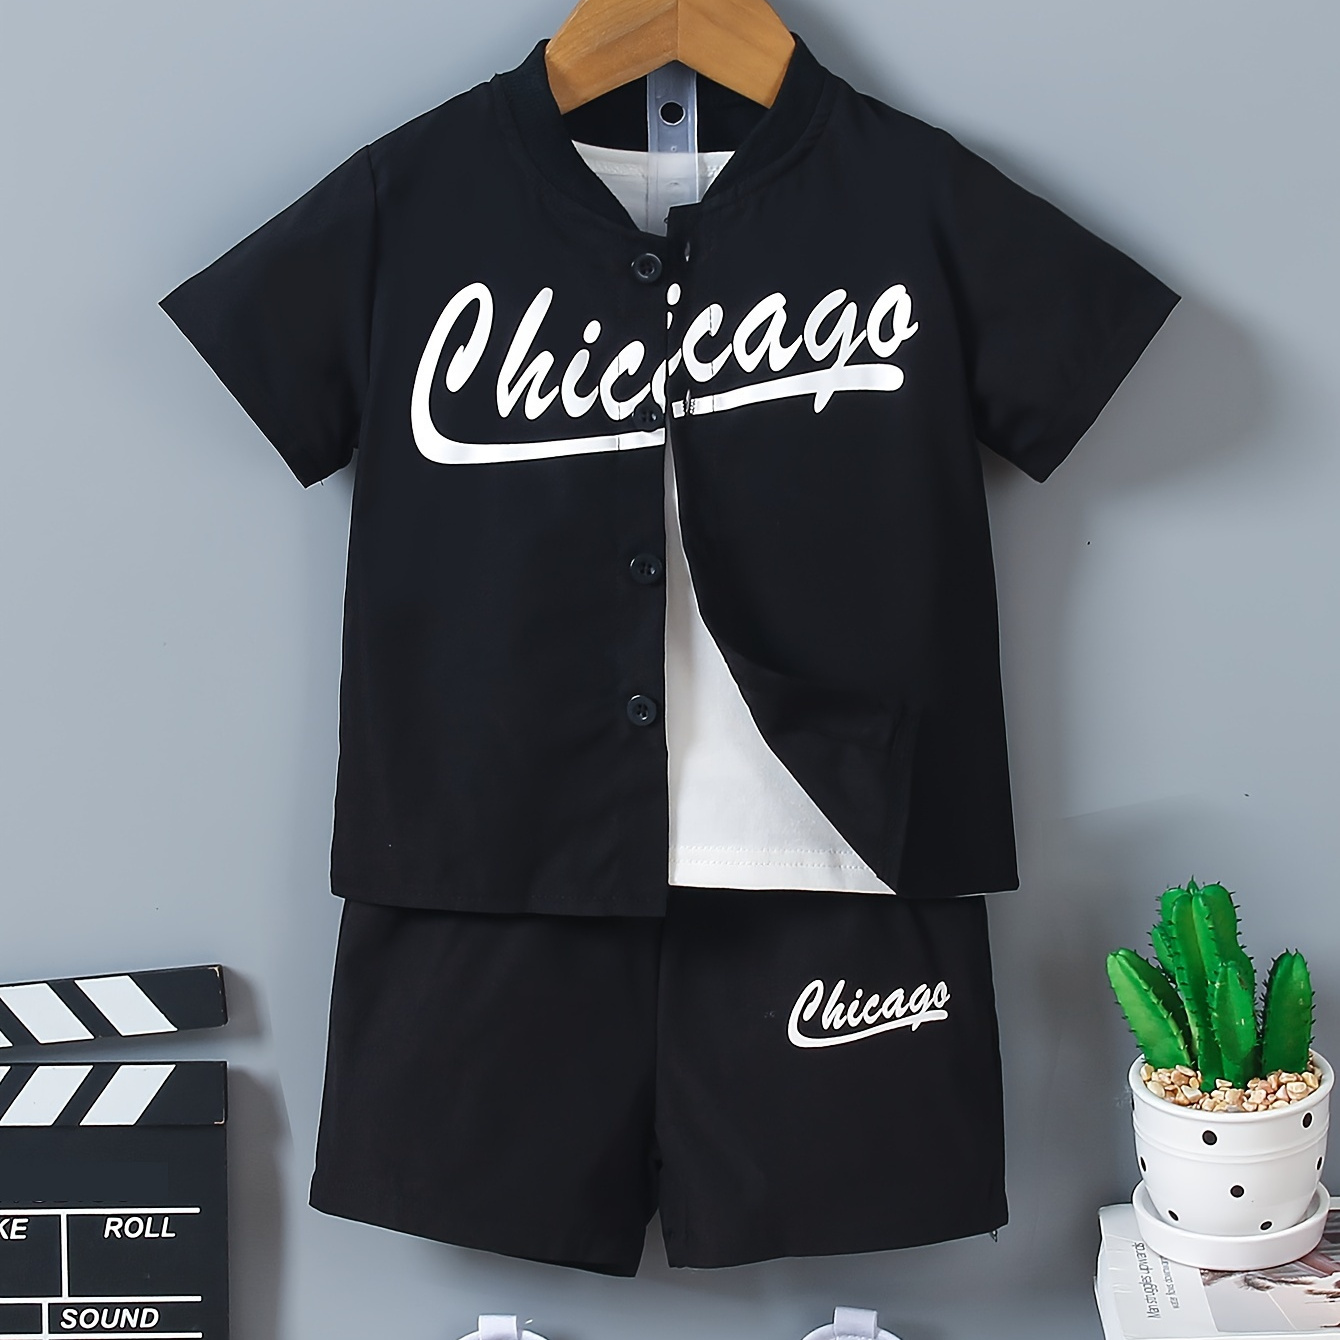 

3pcs Baby Boys "chicago" Print Summer Casual Outfit, Short Sleeve Top & T-shirt & Shorts Set, Toddler & Infant Boy's Clothes